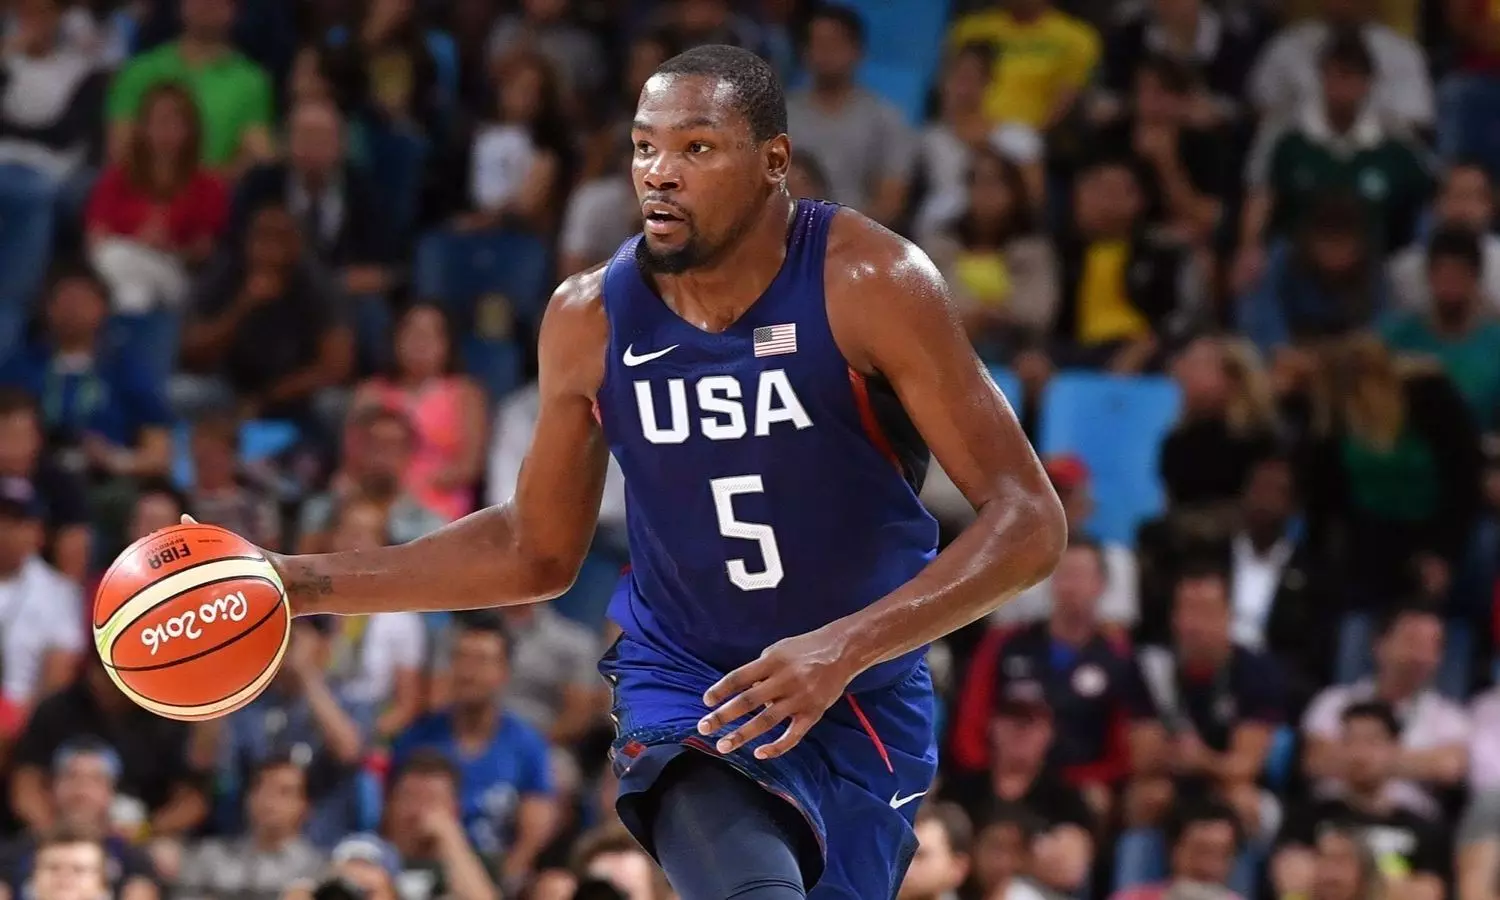 Tokyo Olympics: Basketball LIVE, July 25, Day 2 —Team USA Men's Basketball kick off their campaign — Updates, score, results, blog